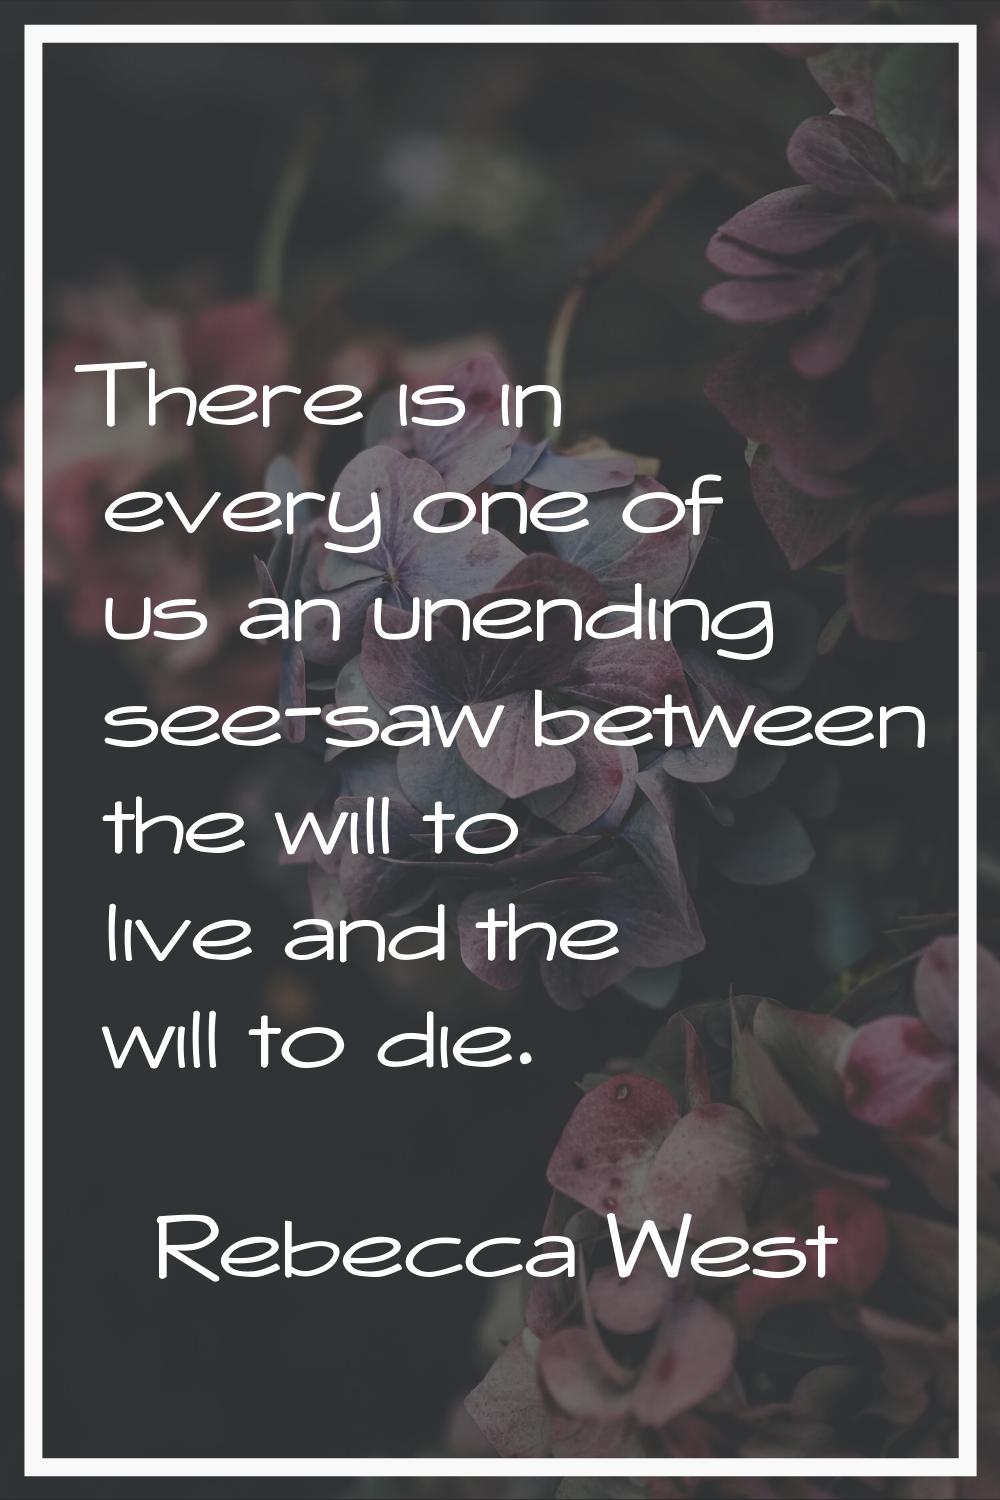 There is in every one of us an unending see-saw between the will to live and the will to die.